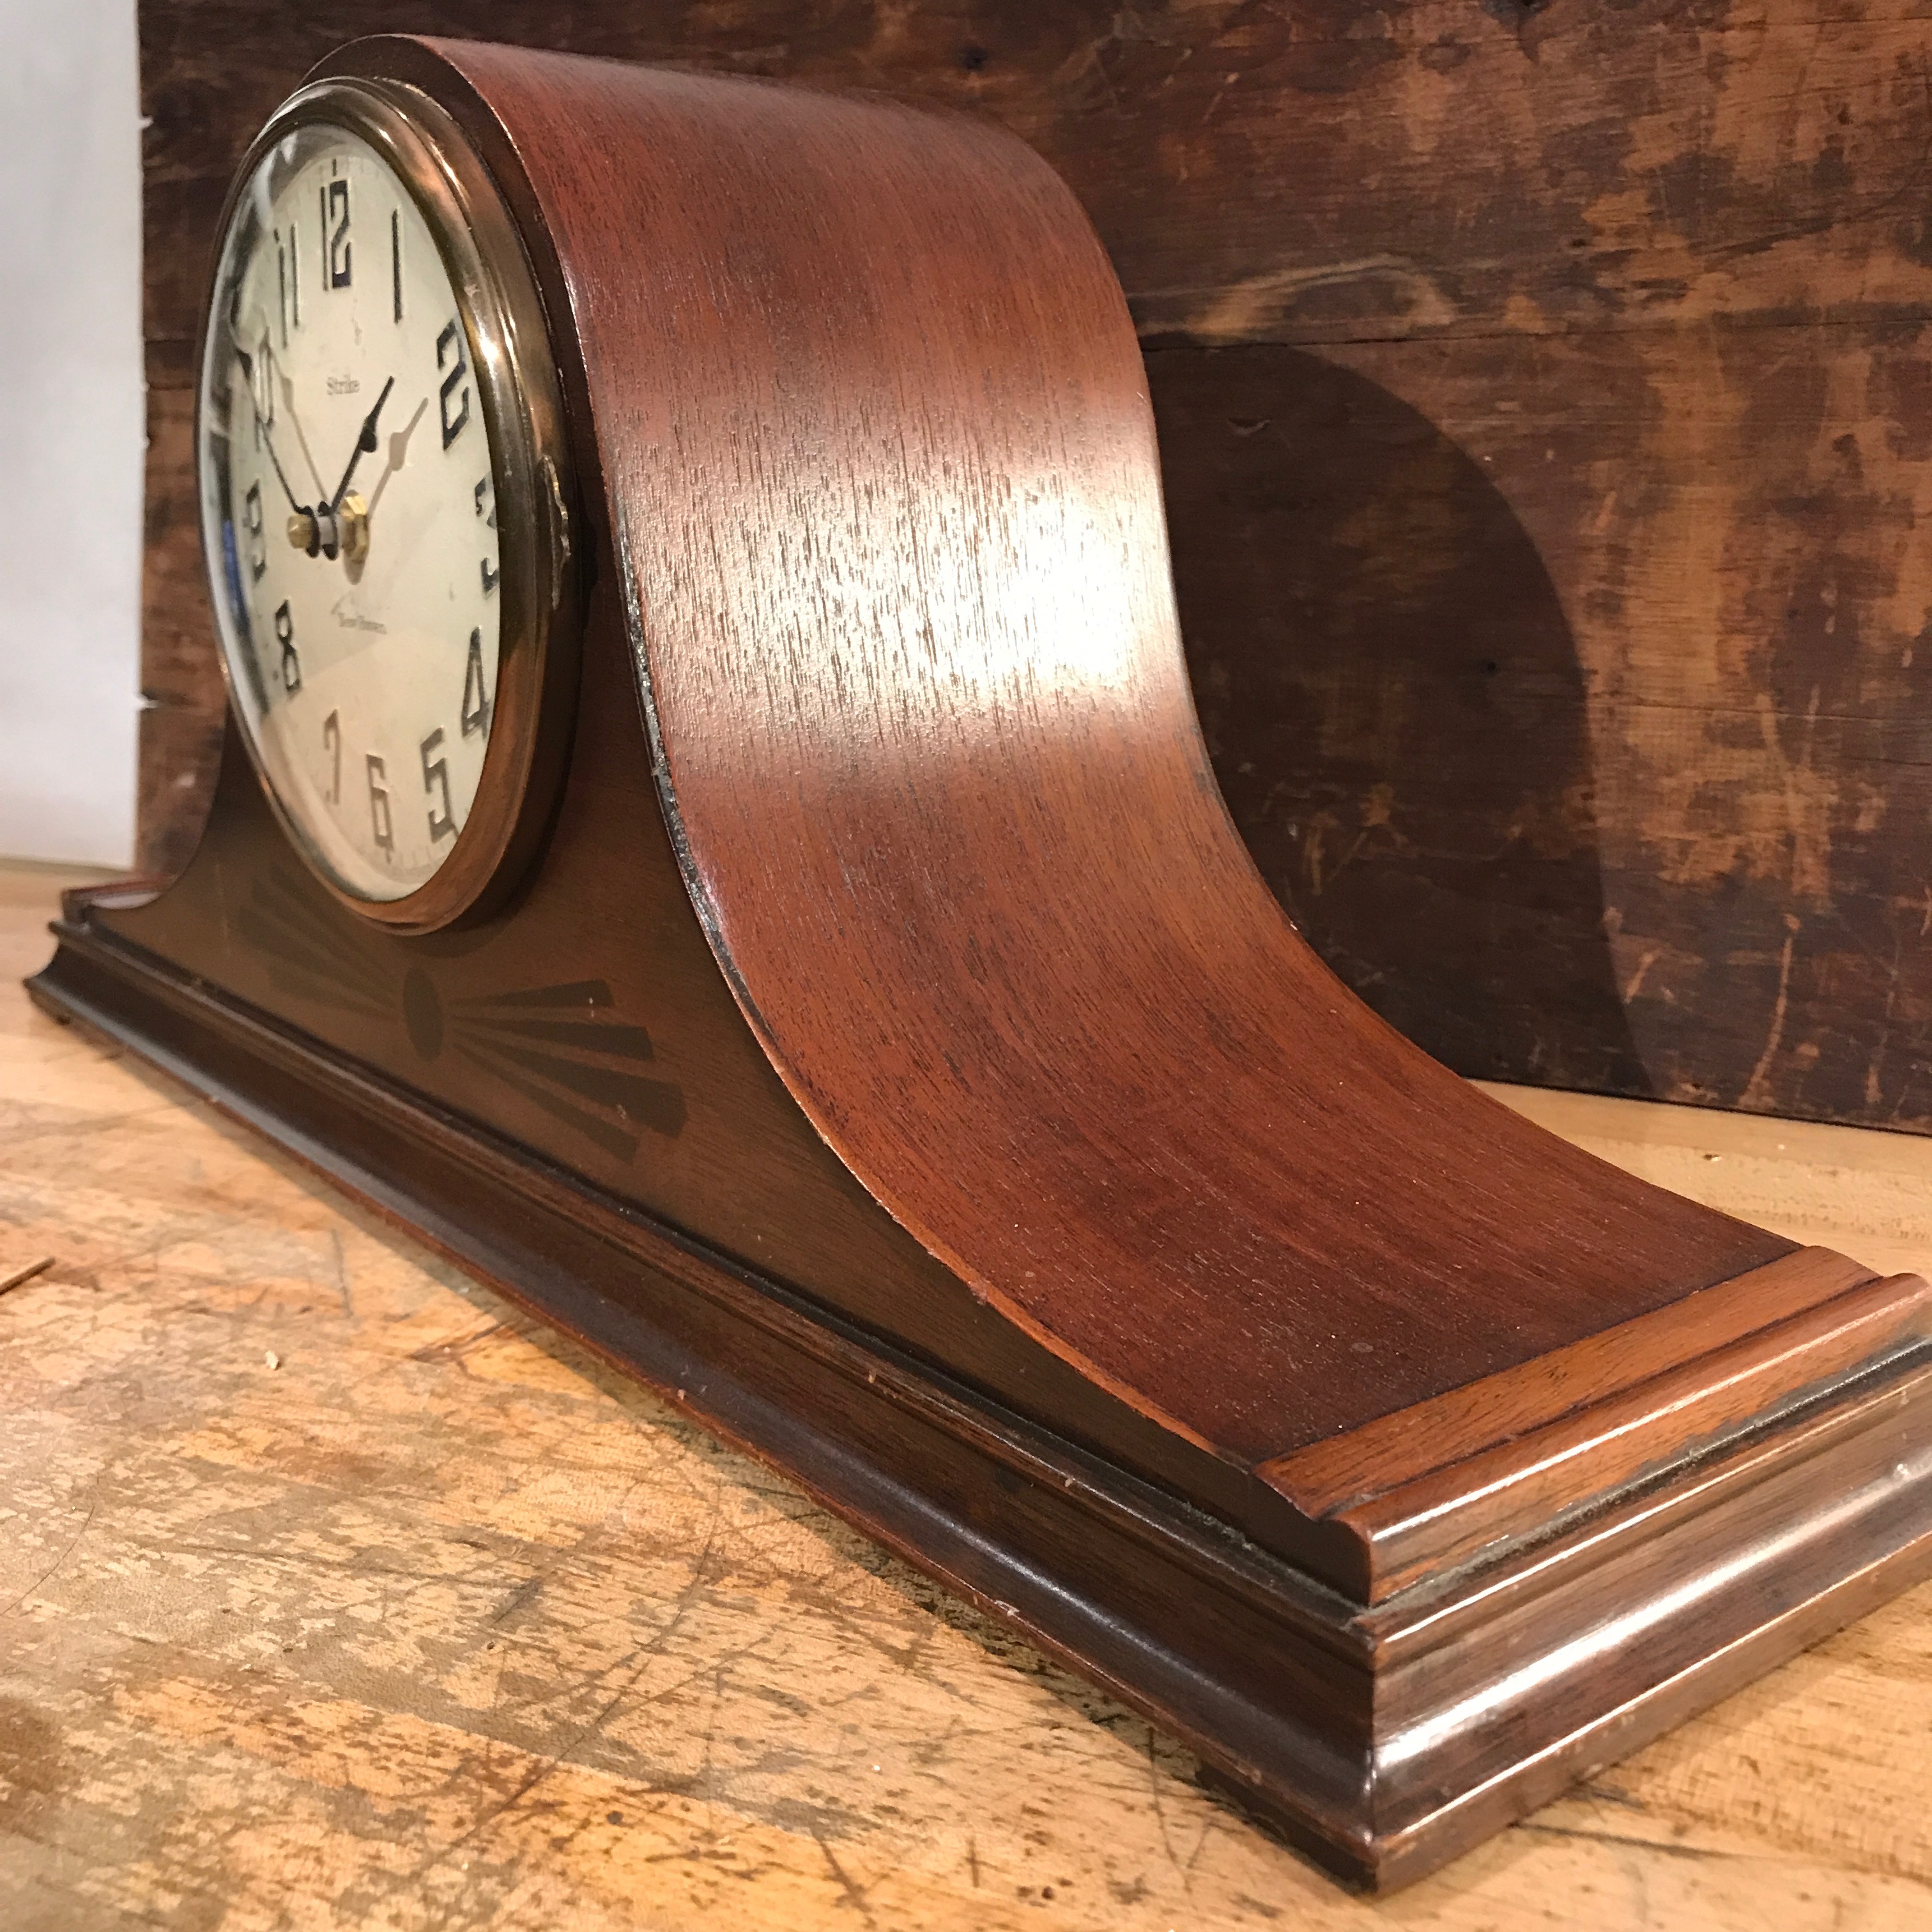 New Haven Humpback Mantle Clock This Style First Appeared In The Late S